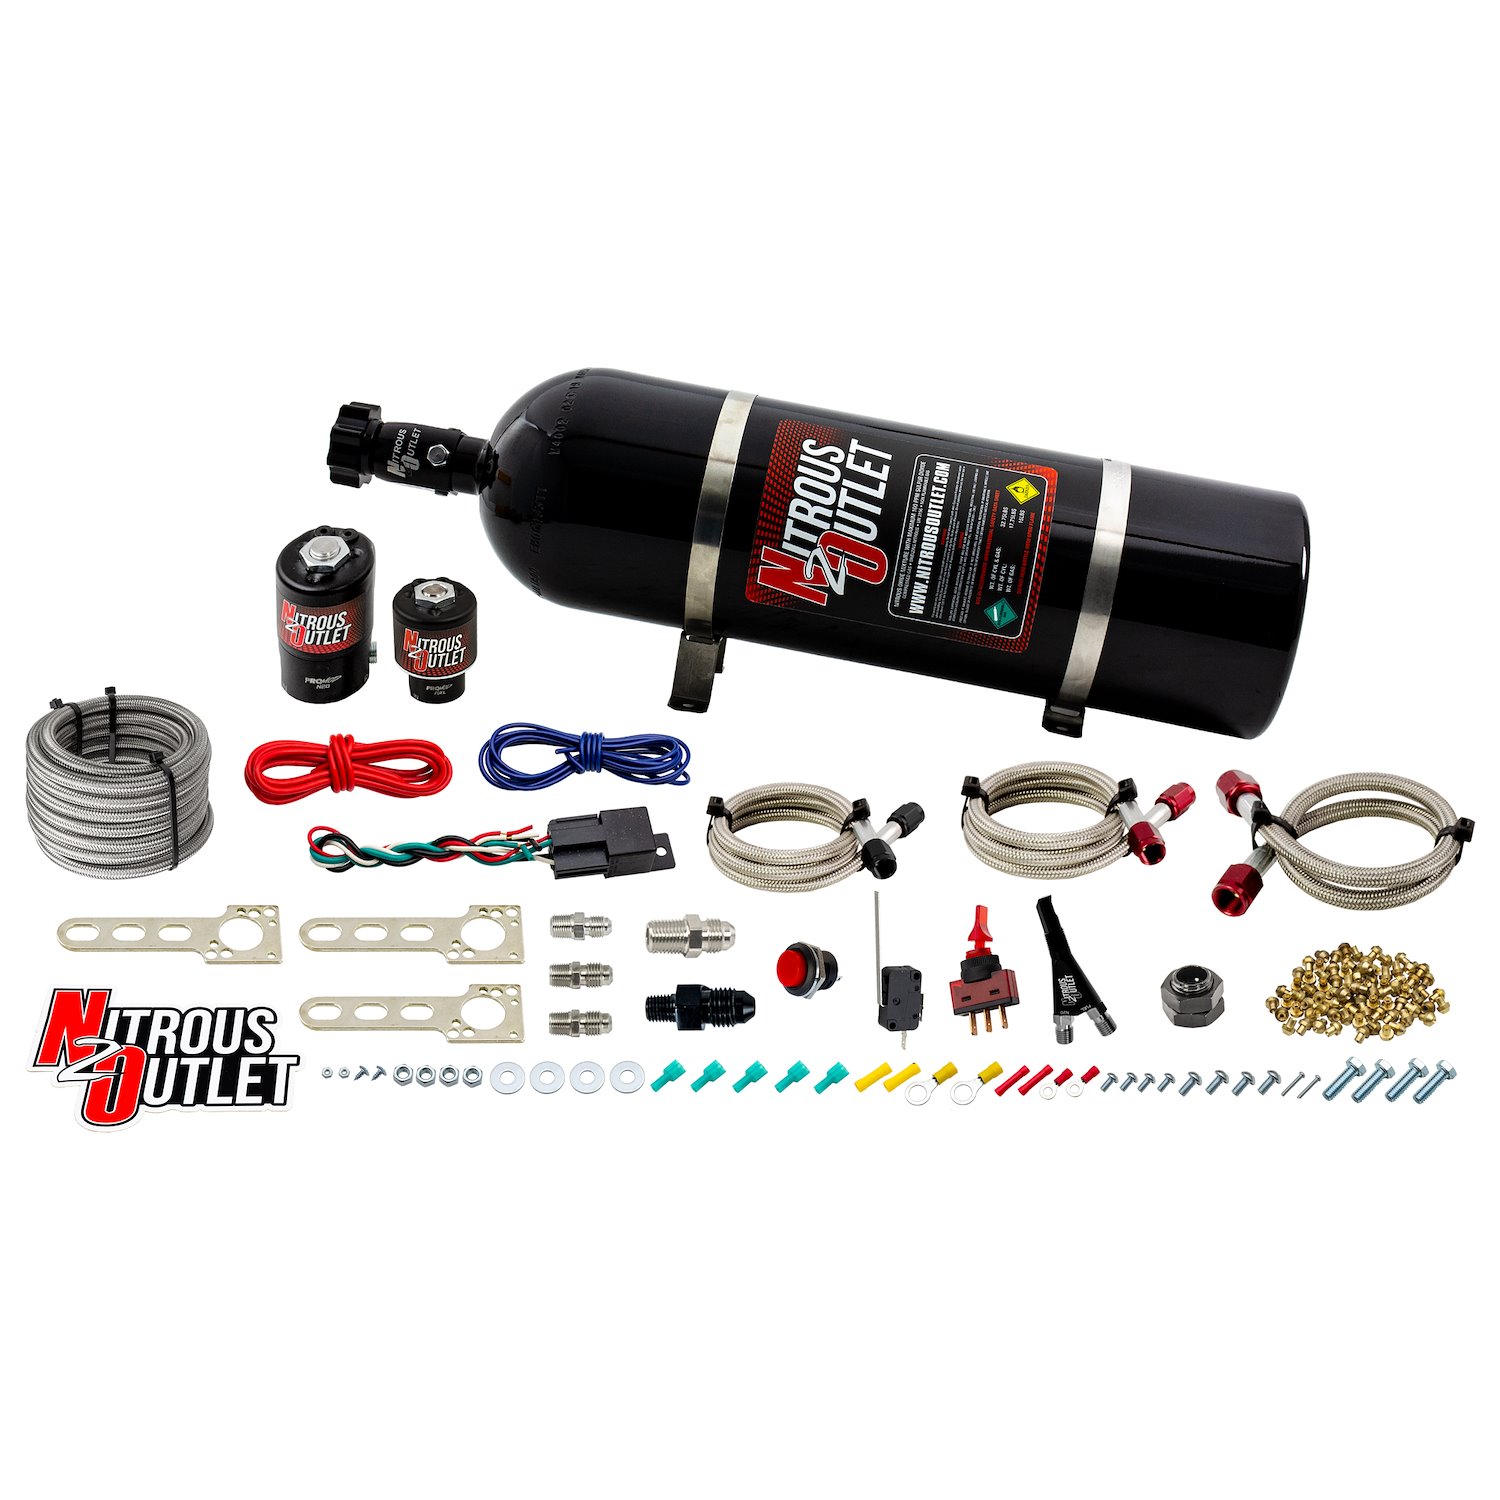 00-10010-15 EFI Single-Nozzle System, 1987-1998 Ford Mustang, Gas/E85, 5-55psi, 35-200HP, 15lb Bottle